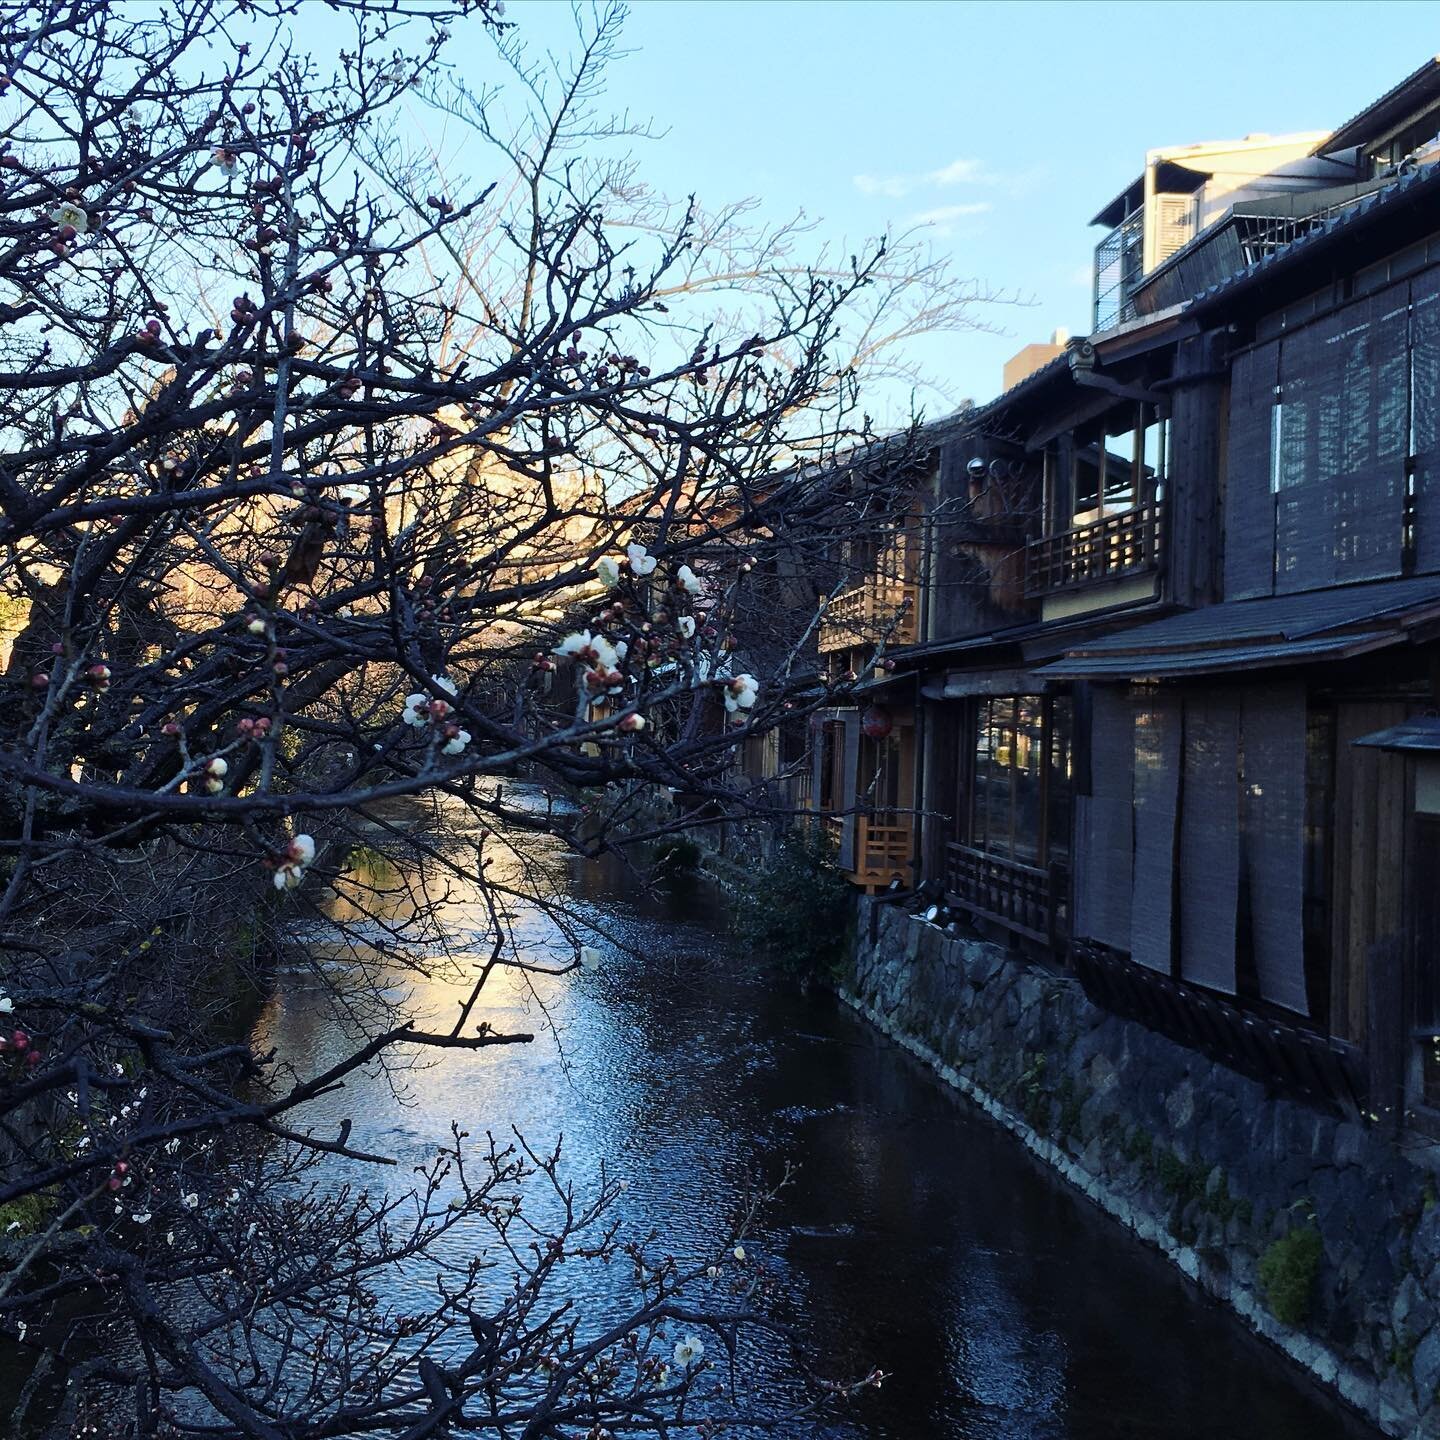 Plum blossoms are gradually in bloom in #kyoto . So beautiful.